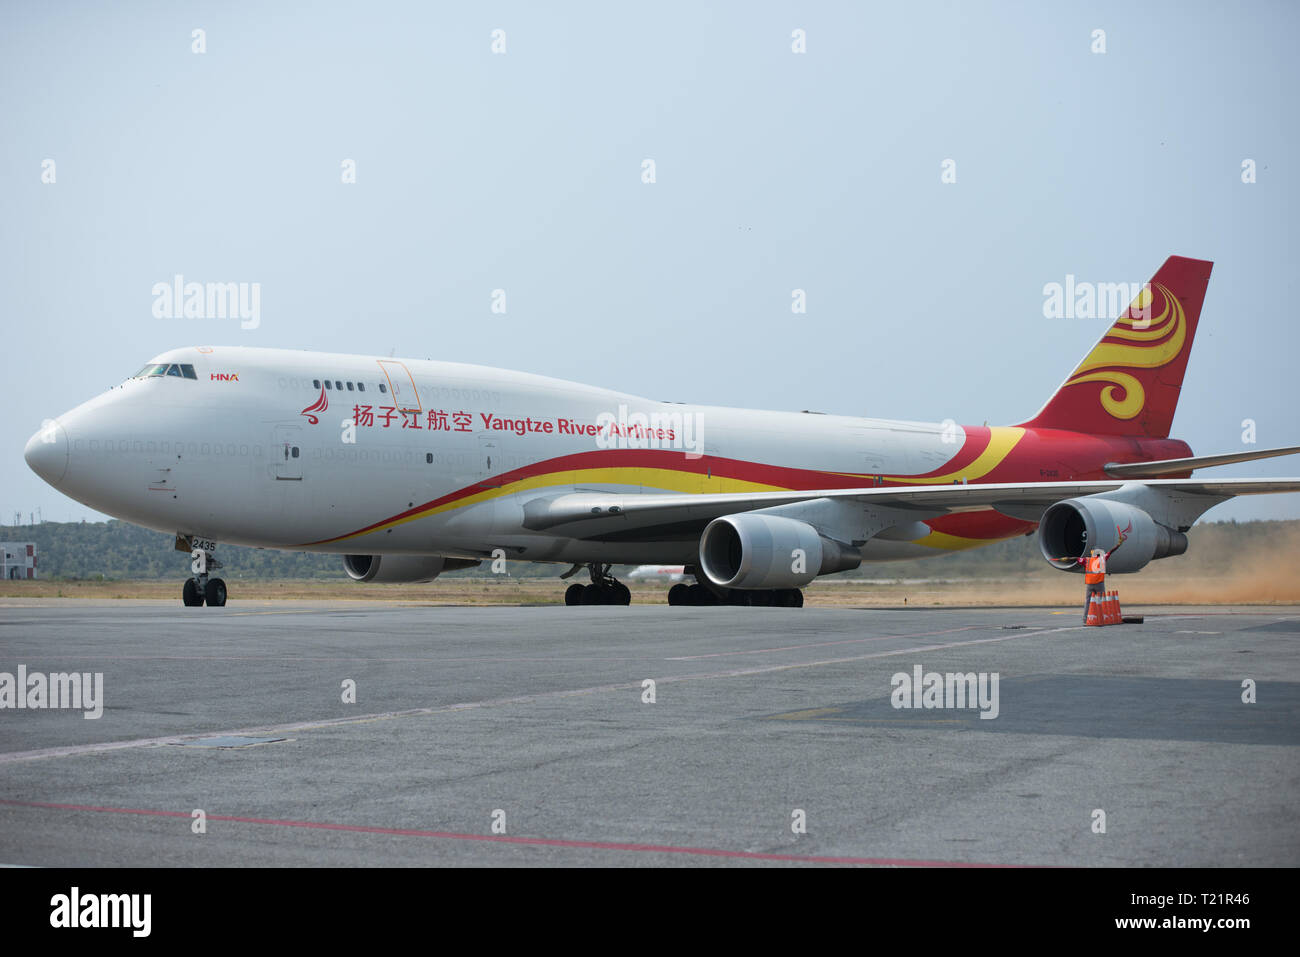 (190330) -- CARACAS, March 30, 2019 (Xinhua) -- The plane loaded with Chinese aids arrives at the Simon Bolivar International Airport in Maiquetia in the state of Vargas, Venezuela, on March 29, 2019. The Venezuelan government received on Friday medical aid from China. (Xinhua/Marcos Salgado) Stock Photo